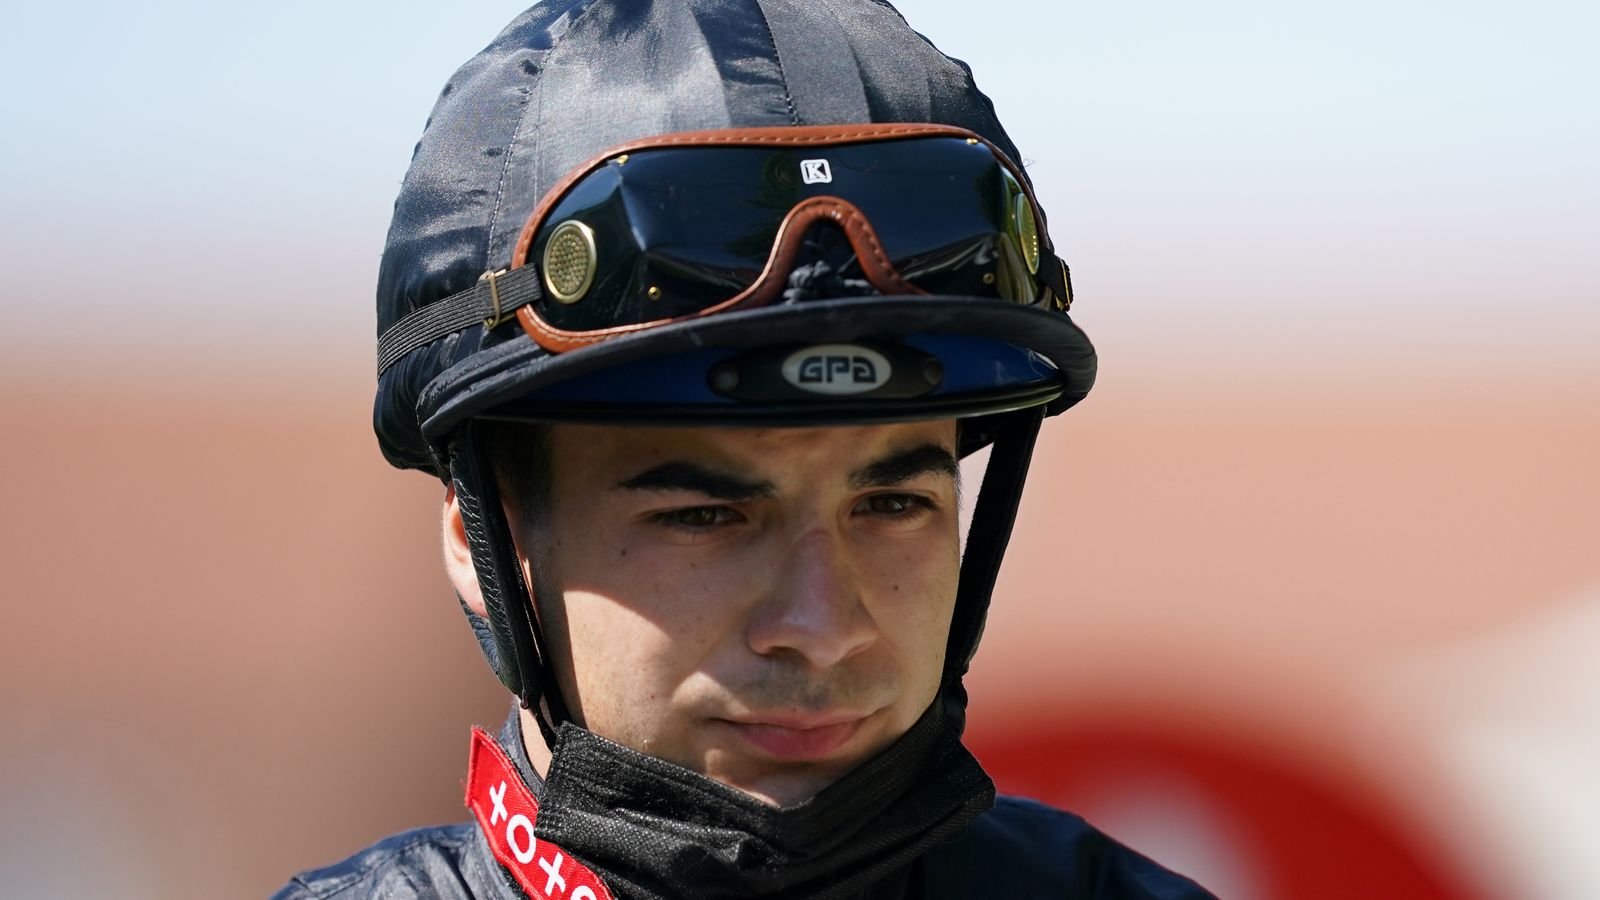 Jockey, 23, dies from injuries after fall from horse